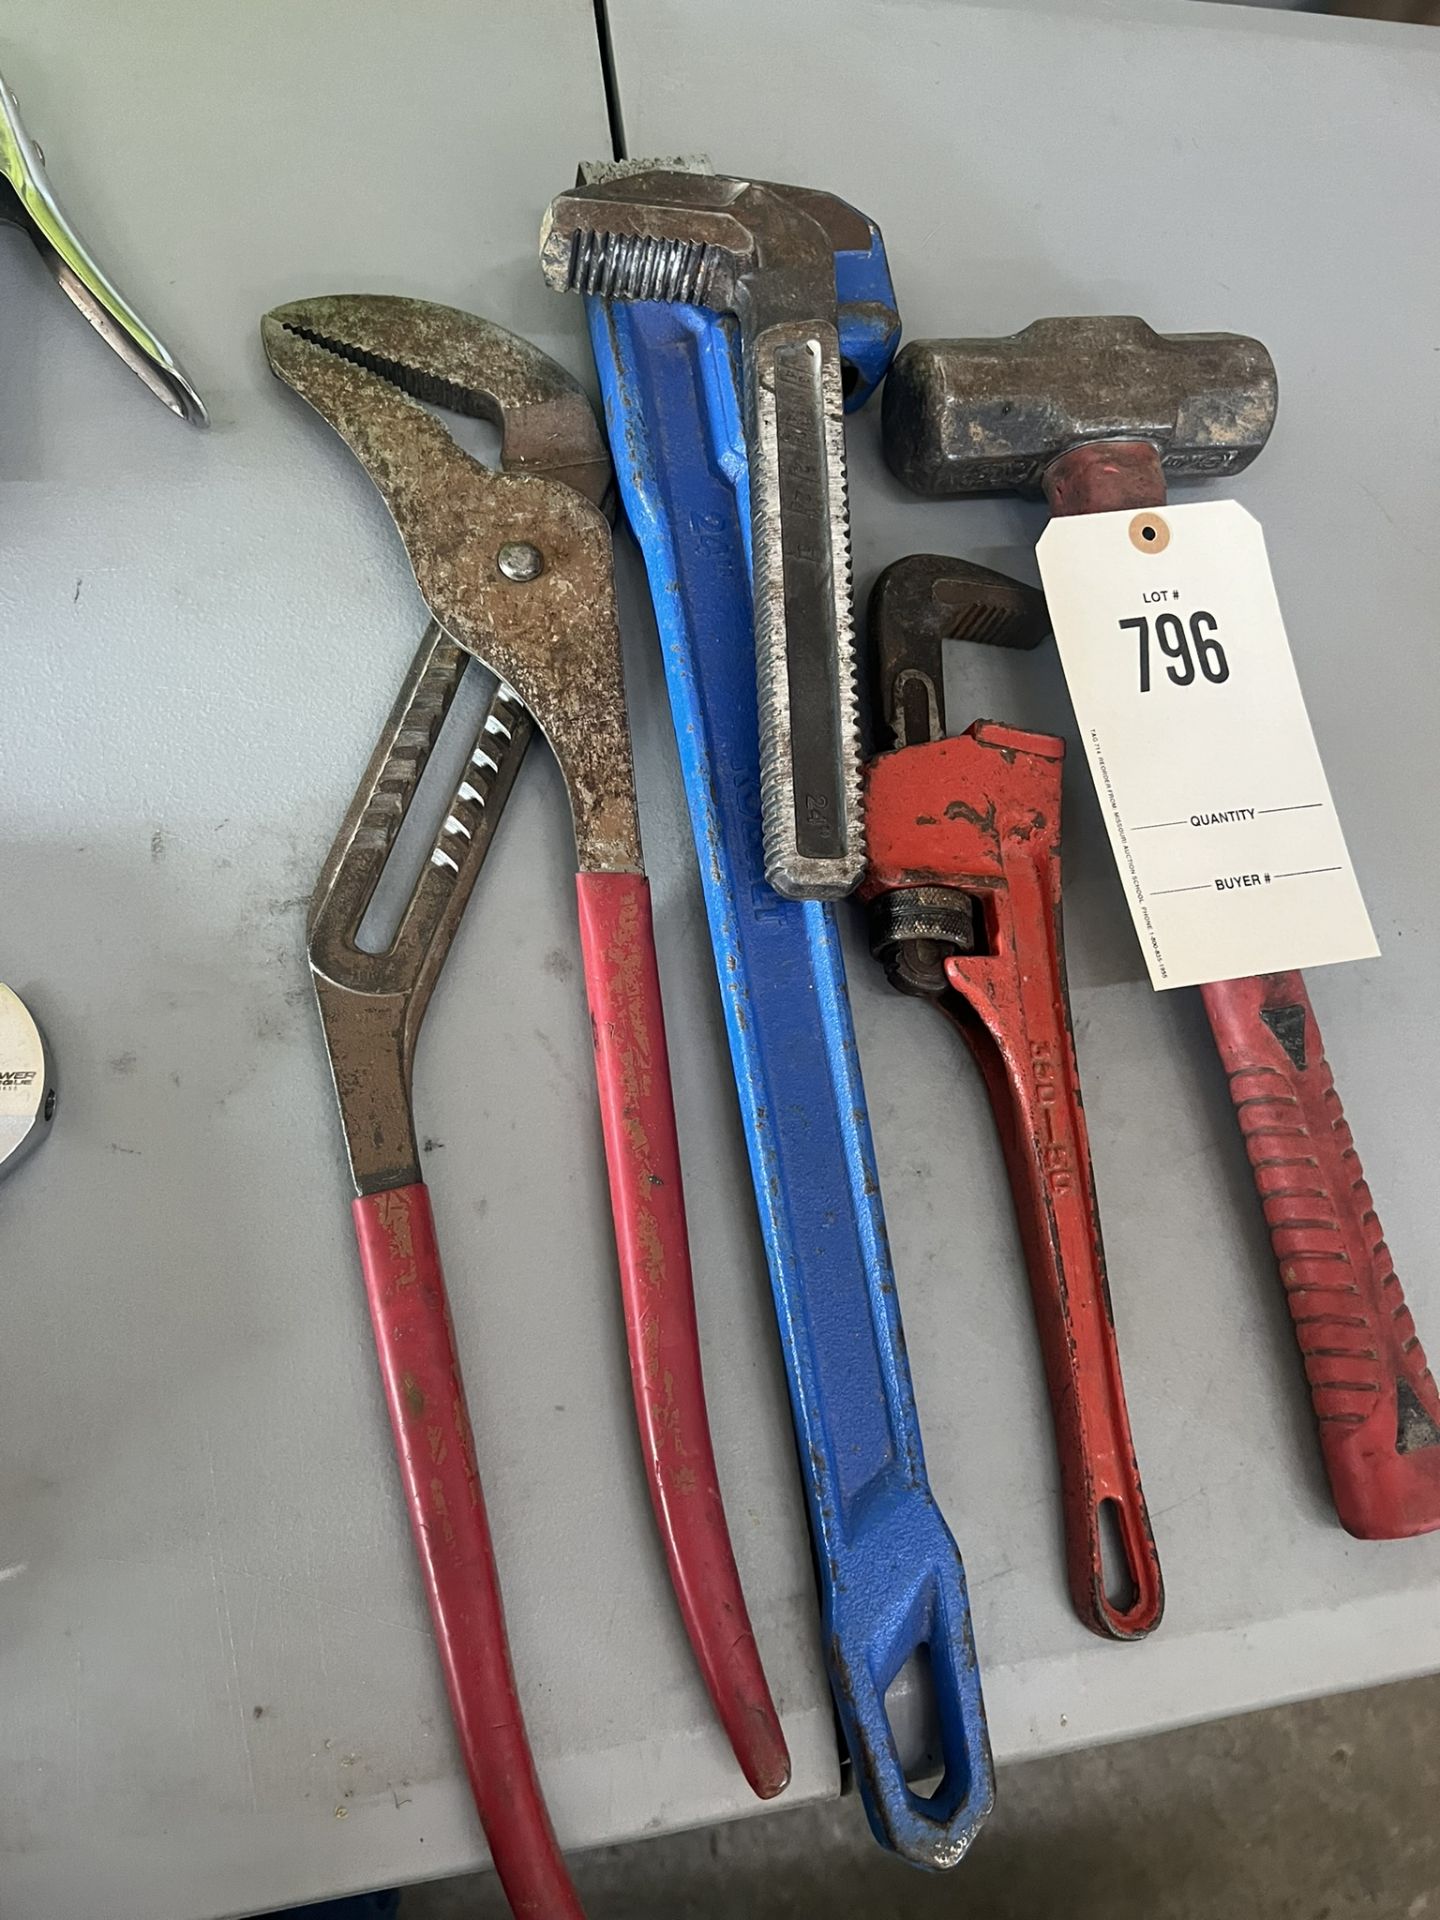 Mallet, Large Channel Locks, Pipe Wrenches